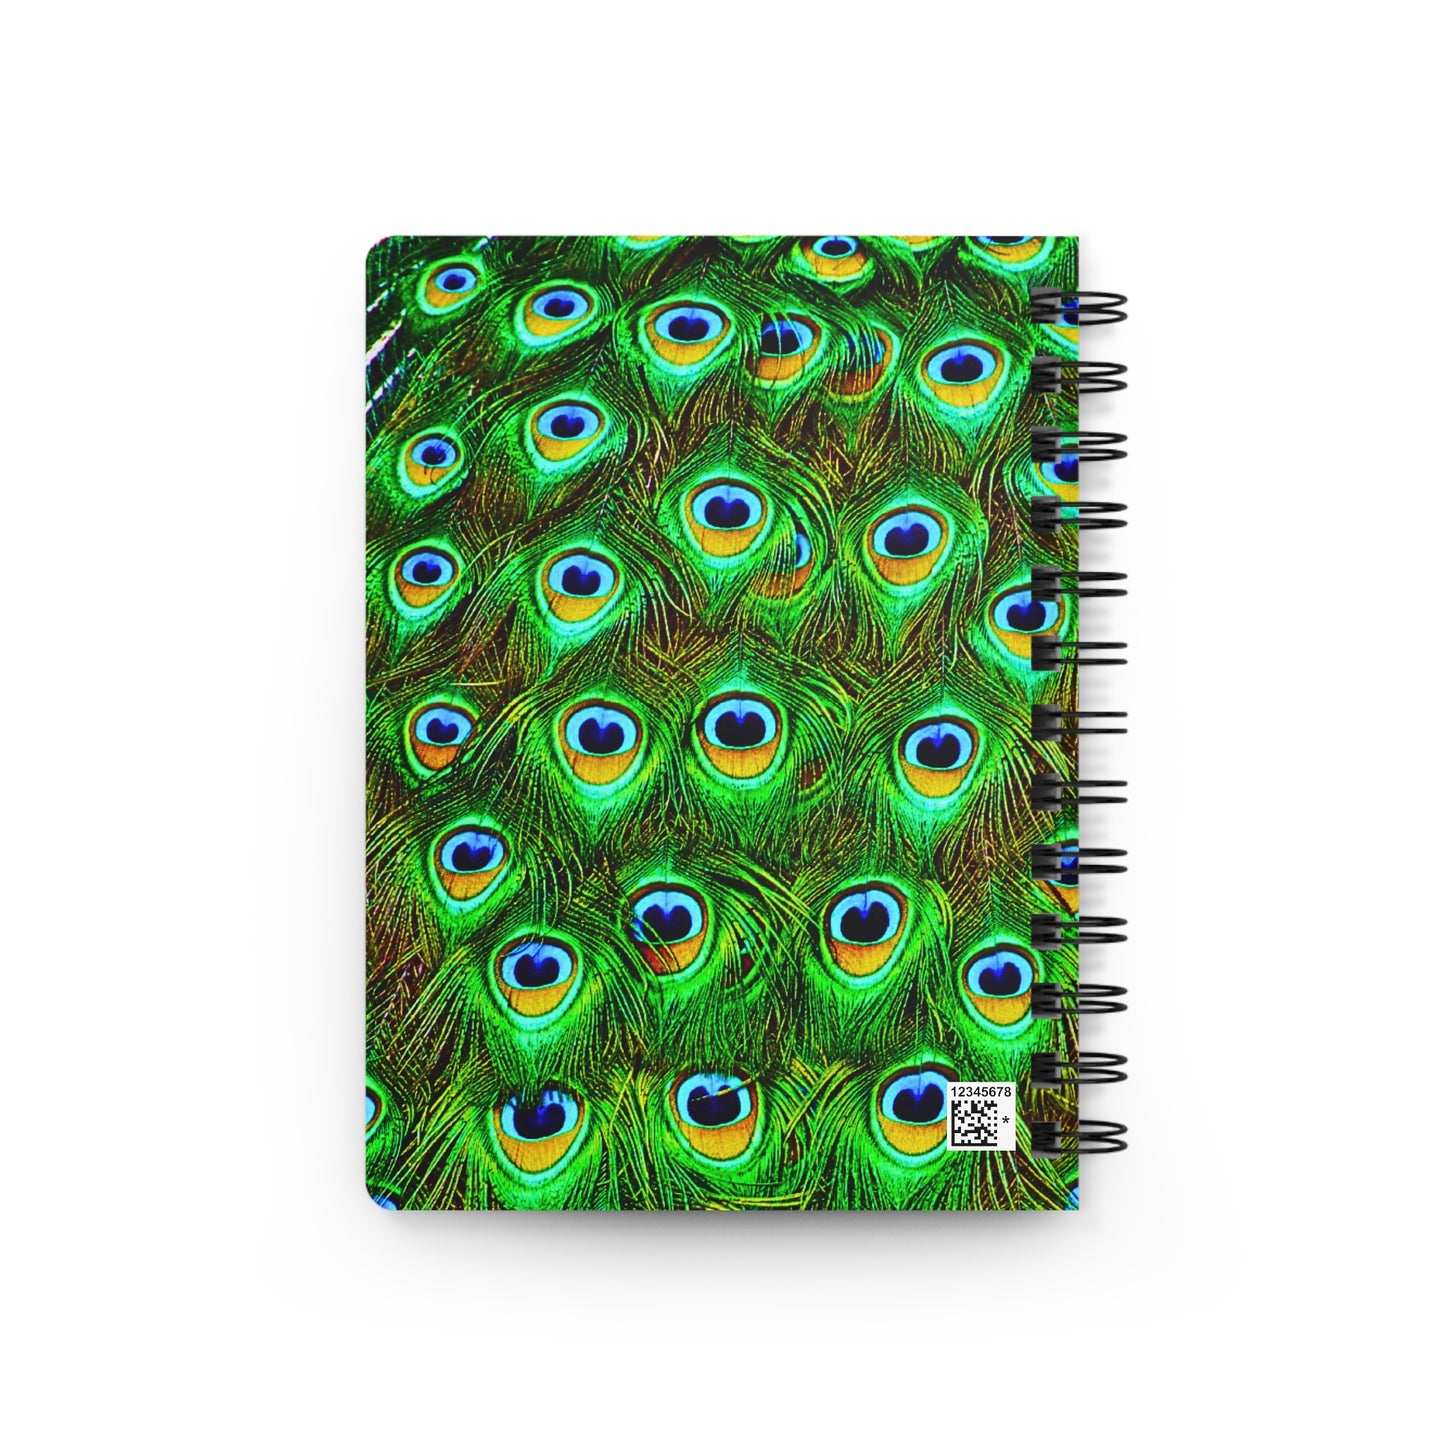 Peacock Plume Writing Sketch Inspiration Spiral Bound Journal